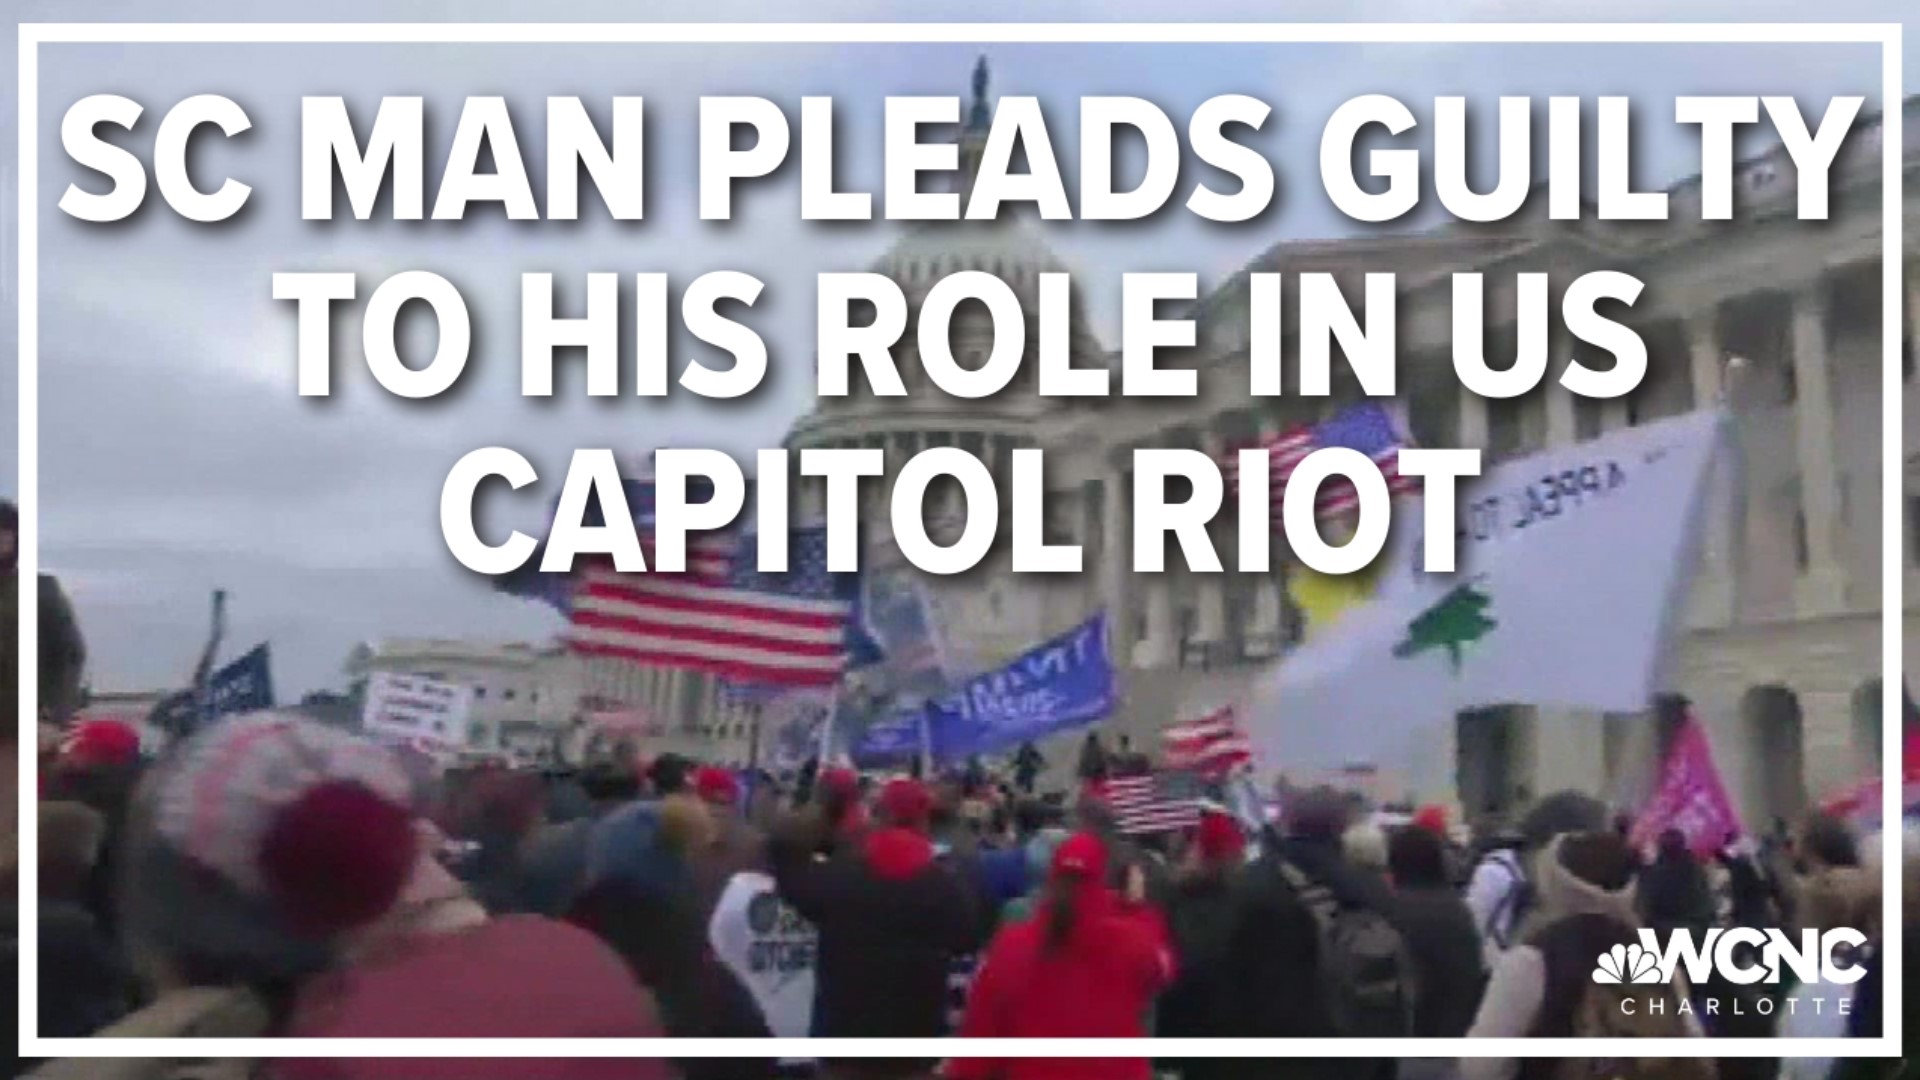 Former cadet and now current firefighter Elliot Bishai pleaded guilty to his involvement in the deadly riot at the U.S. Capitol on Jan. 6, 2021.